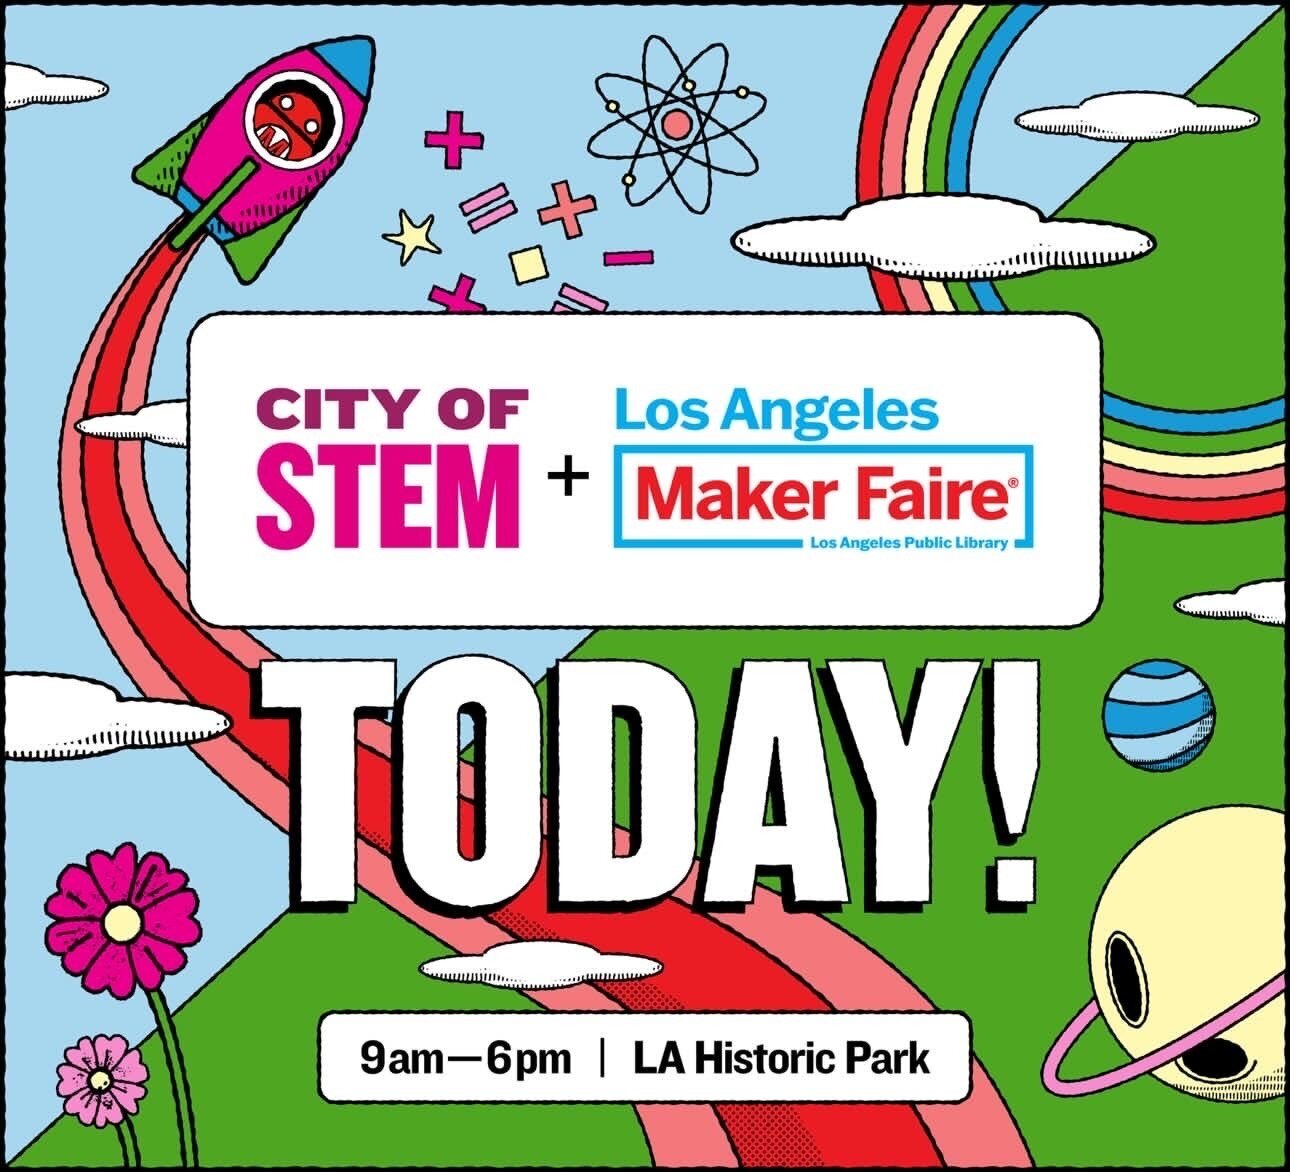 Today City of Stem and LA Maker Faire will combine forces to create an interactive event designed to inspire Los Angeles' next generation of scientific leaders, makers, and creative thinkers.💫💡

We will have science celebrities, and hundreds of exp